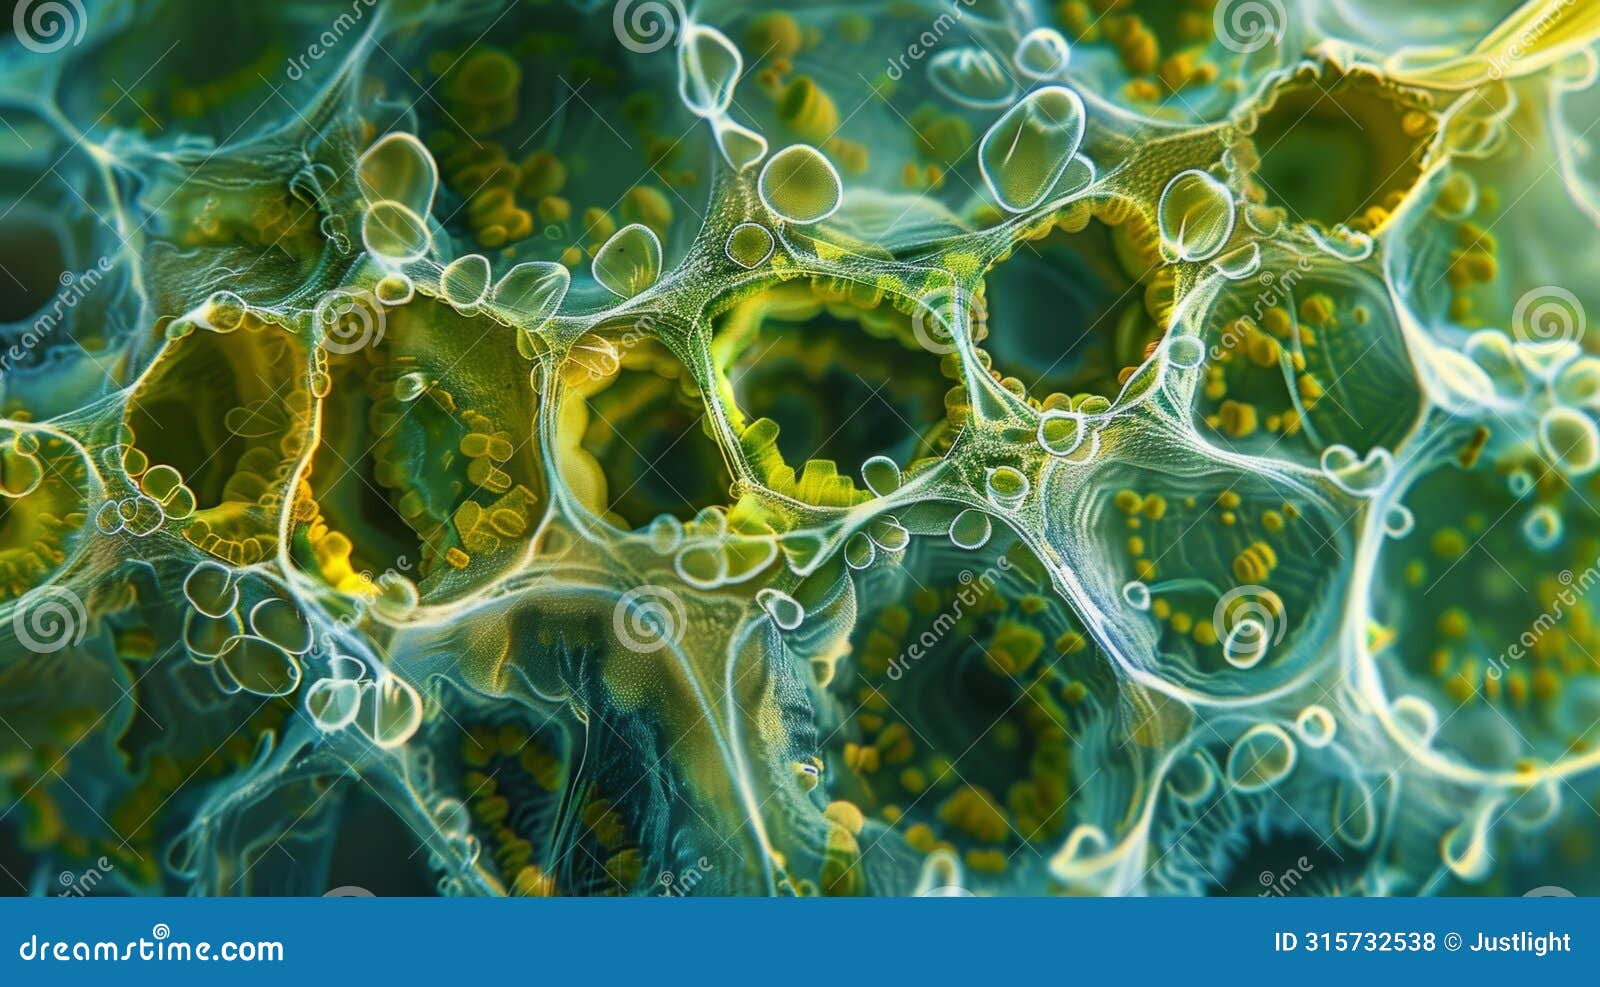 a magnified view of a chloroplasts stroma the fluidfilled region surrounding the thylakoids. the stroma contains a dense